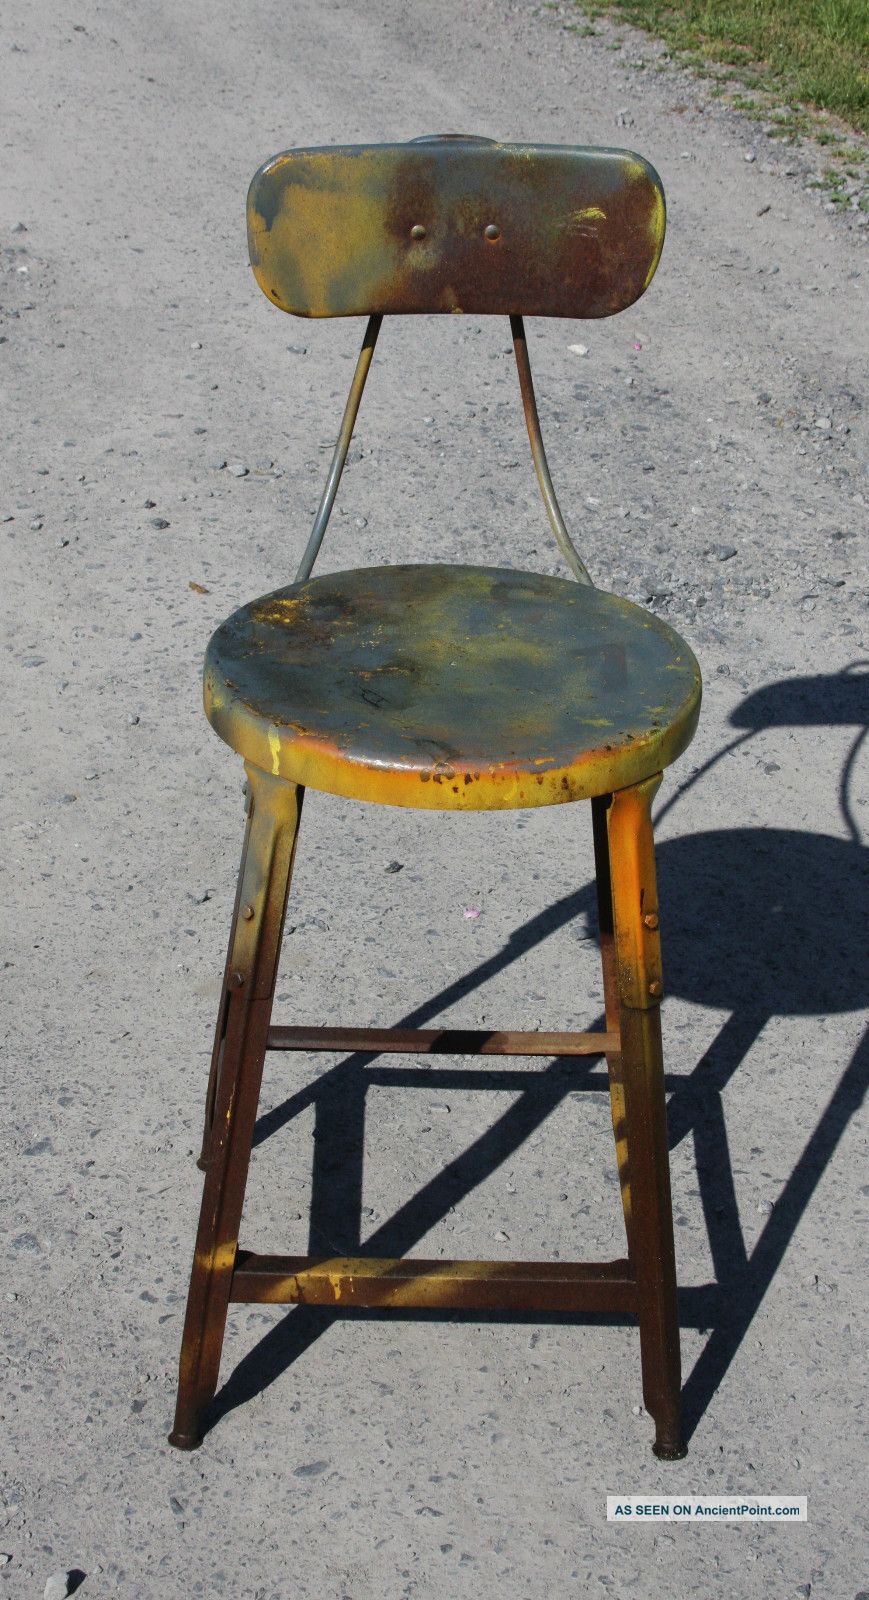 Vintage Industrial Era / Mid Century Modernism Metal High Stool With Back 1900-1950 photo